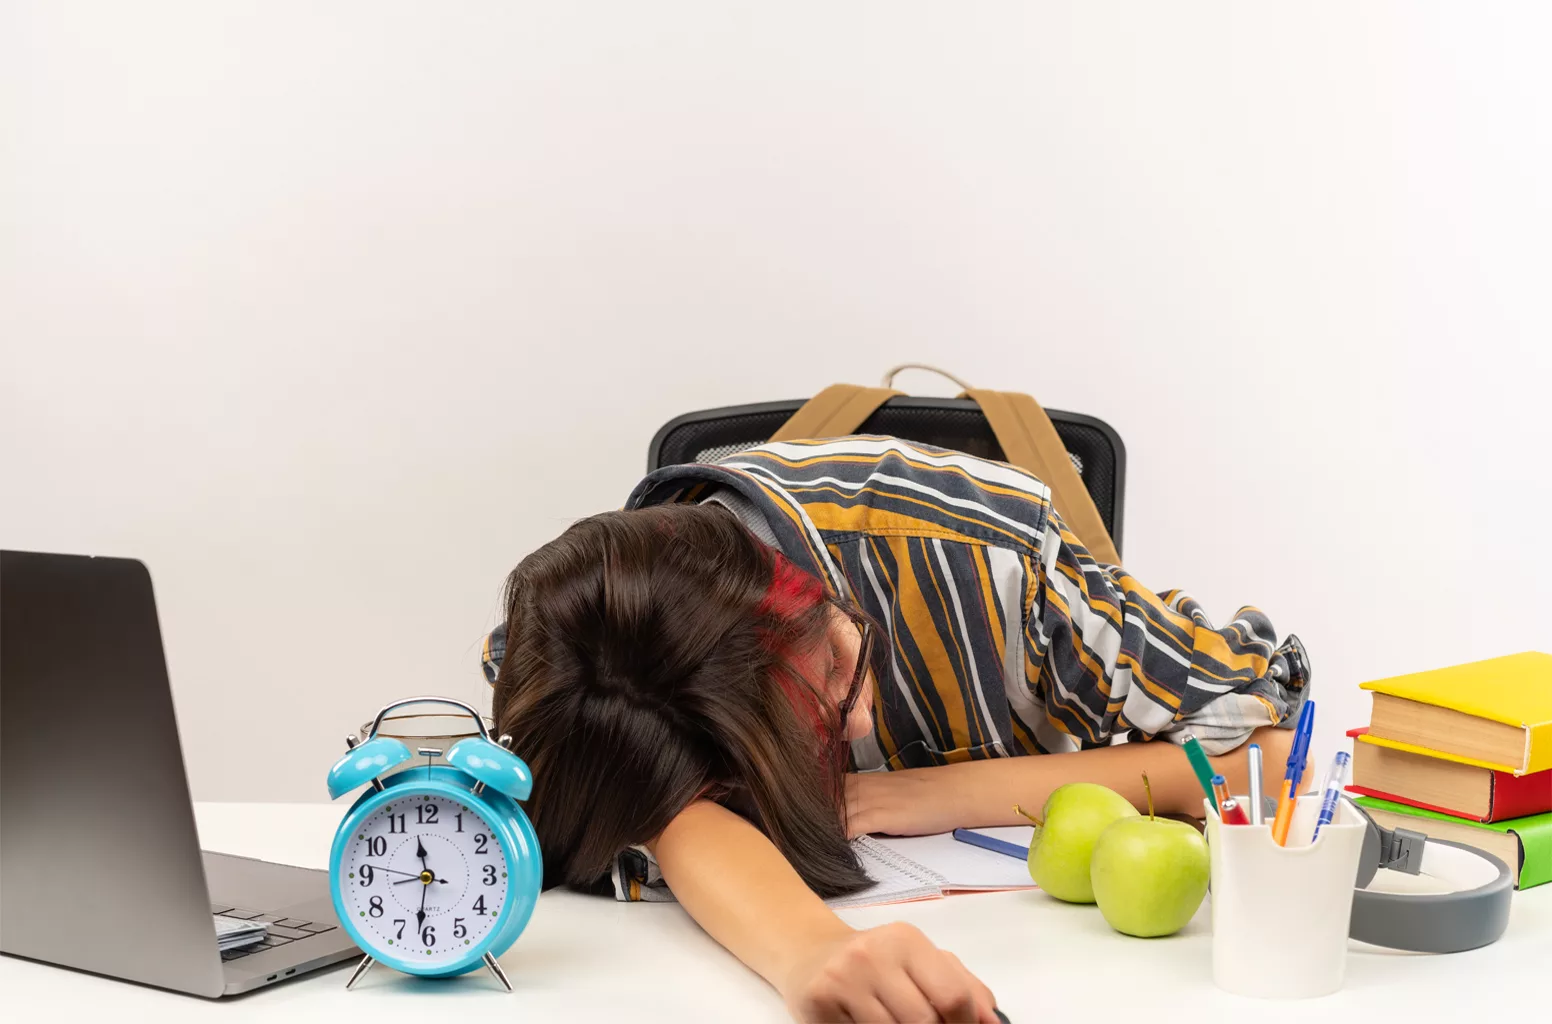 Key Guidelines for Managing Sleep Deprivation during Student Life